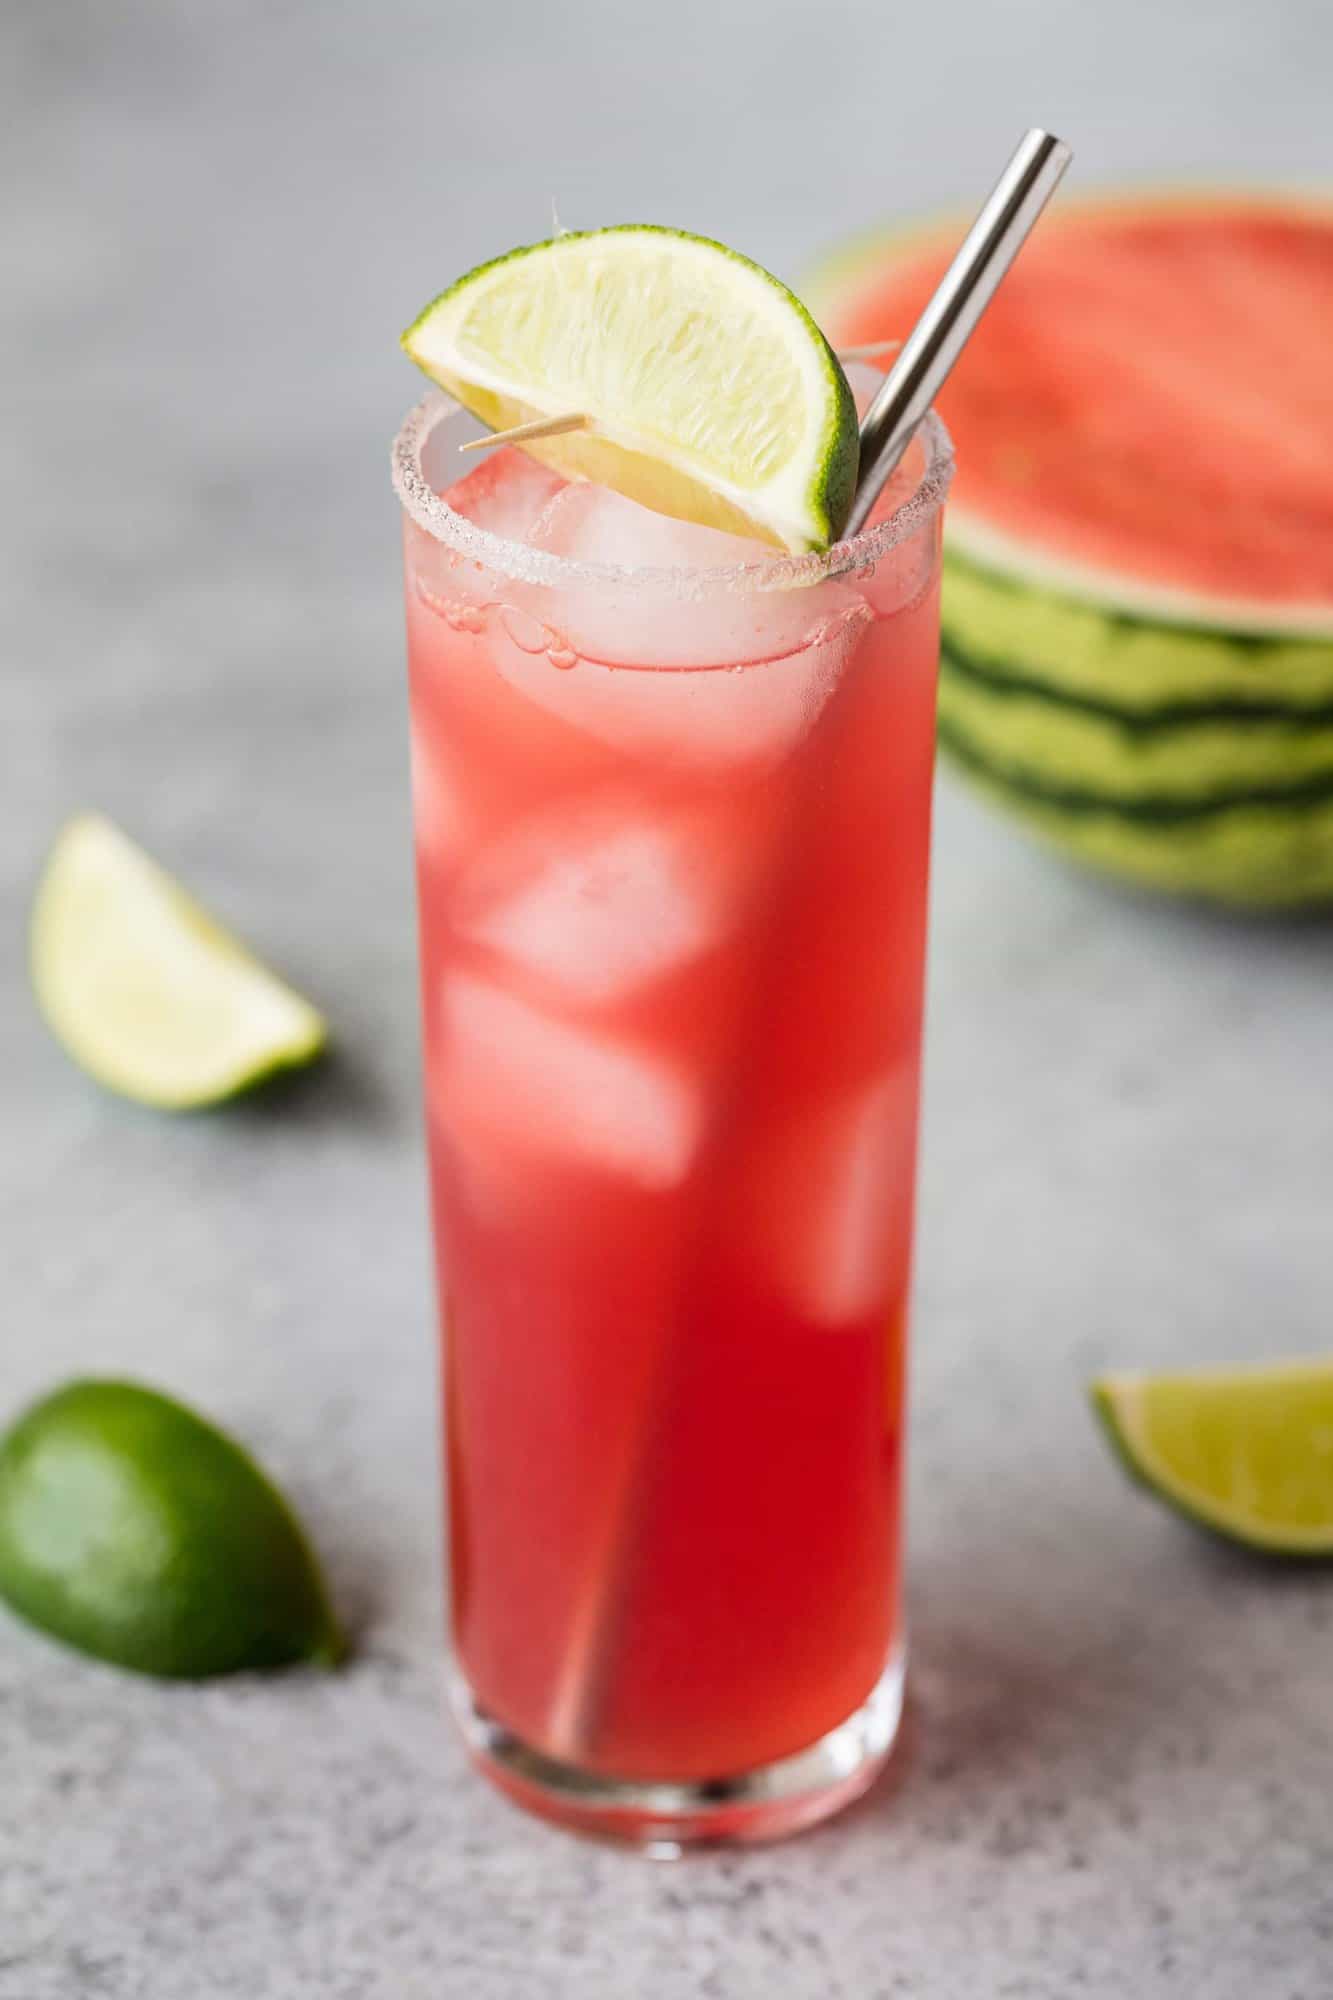 Treat yourself to a Key West Cooler Mocktail and kick back and relax while you enjoy the flavors of of watermelon, cranberry, and passion fruit juices.